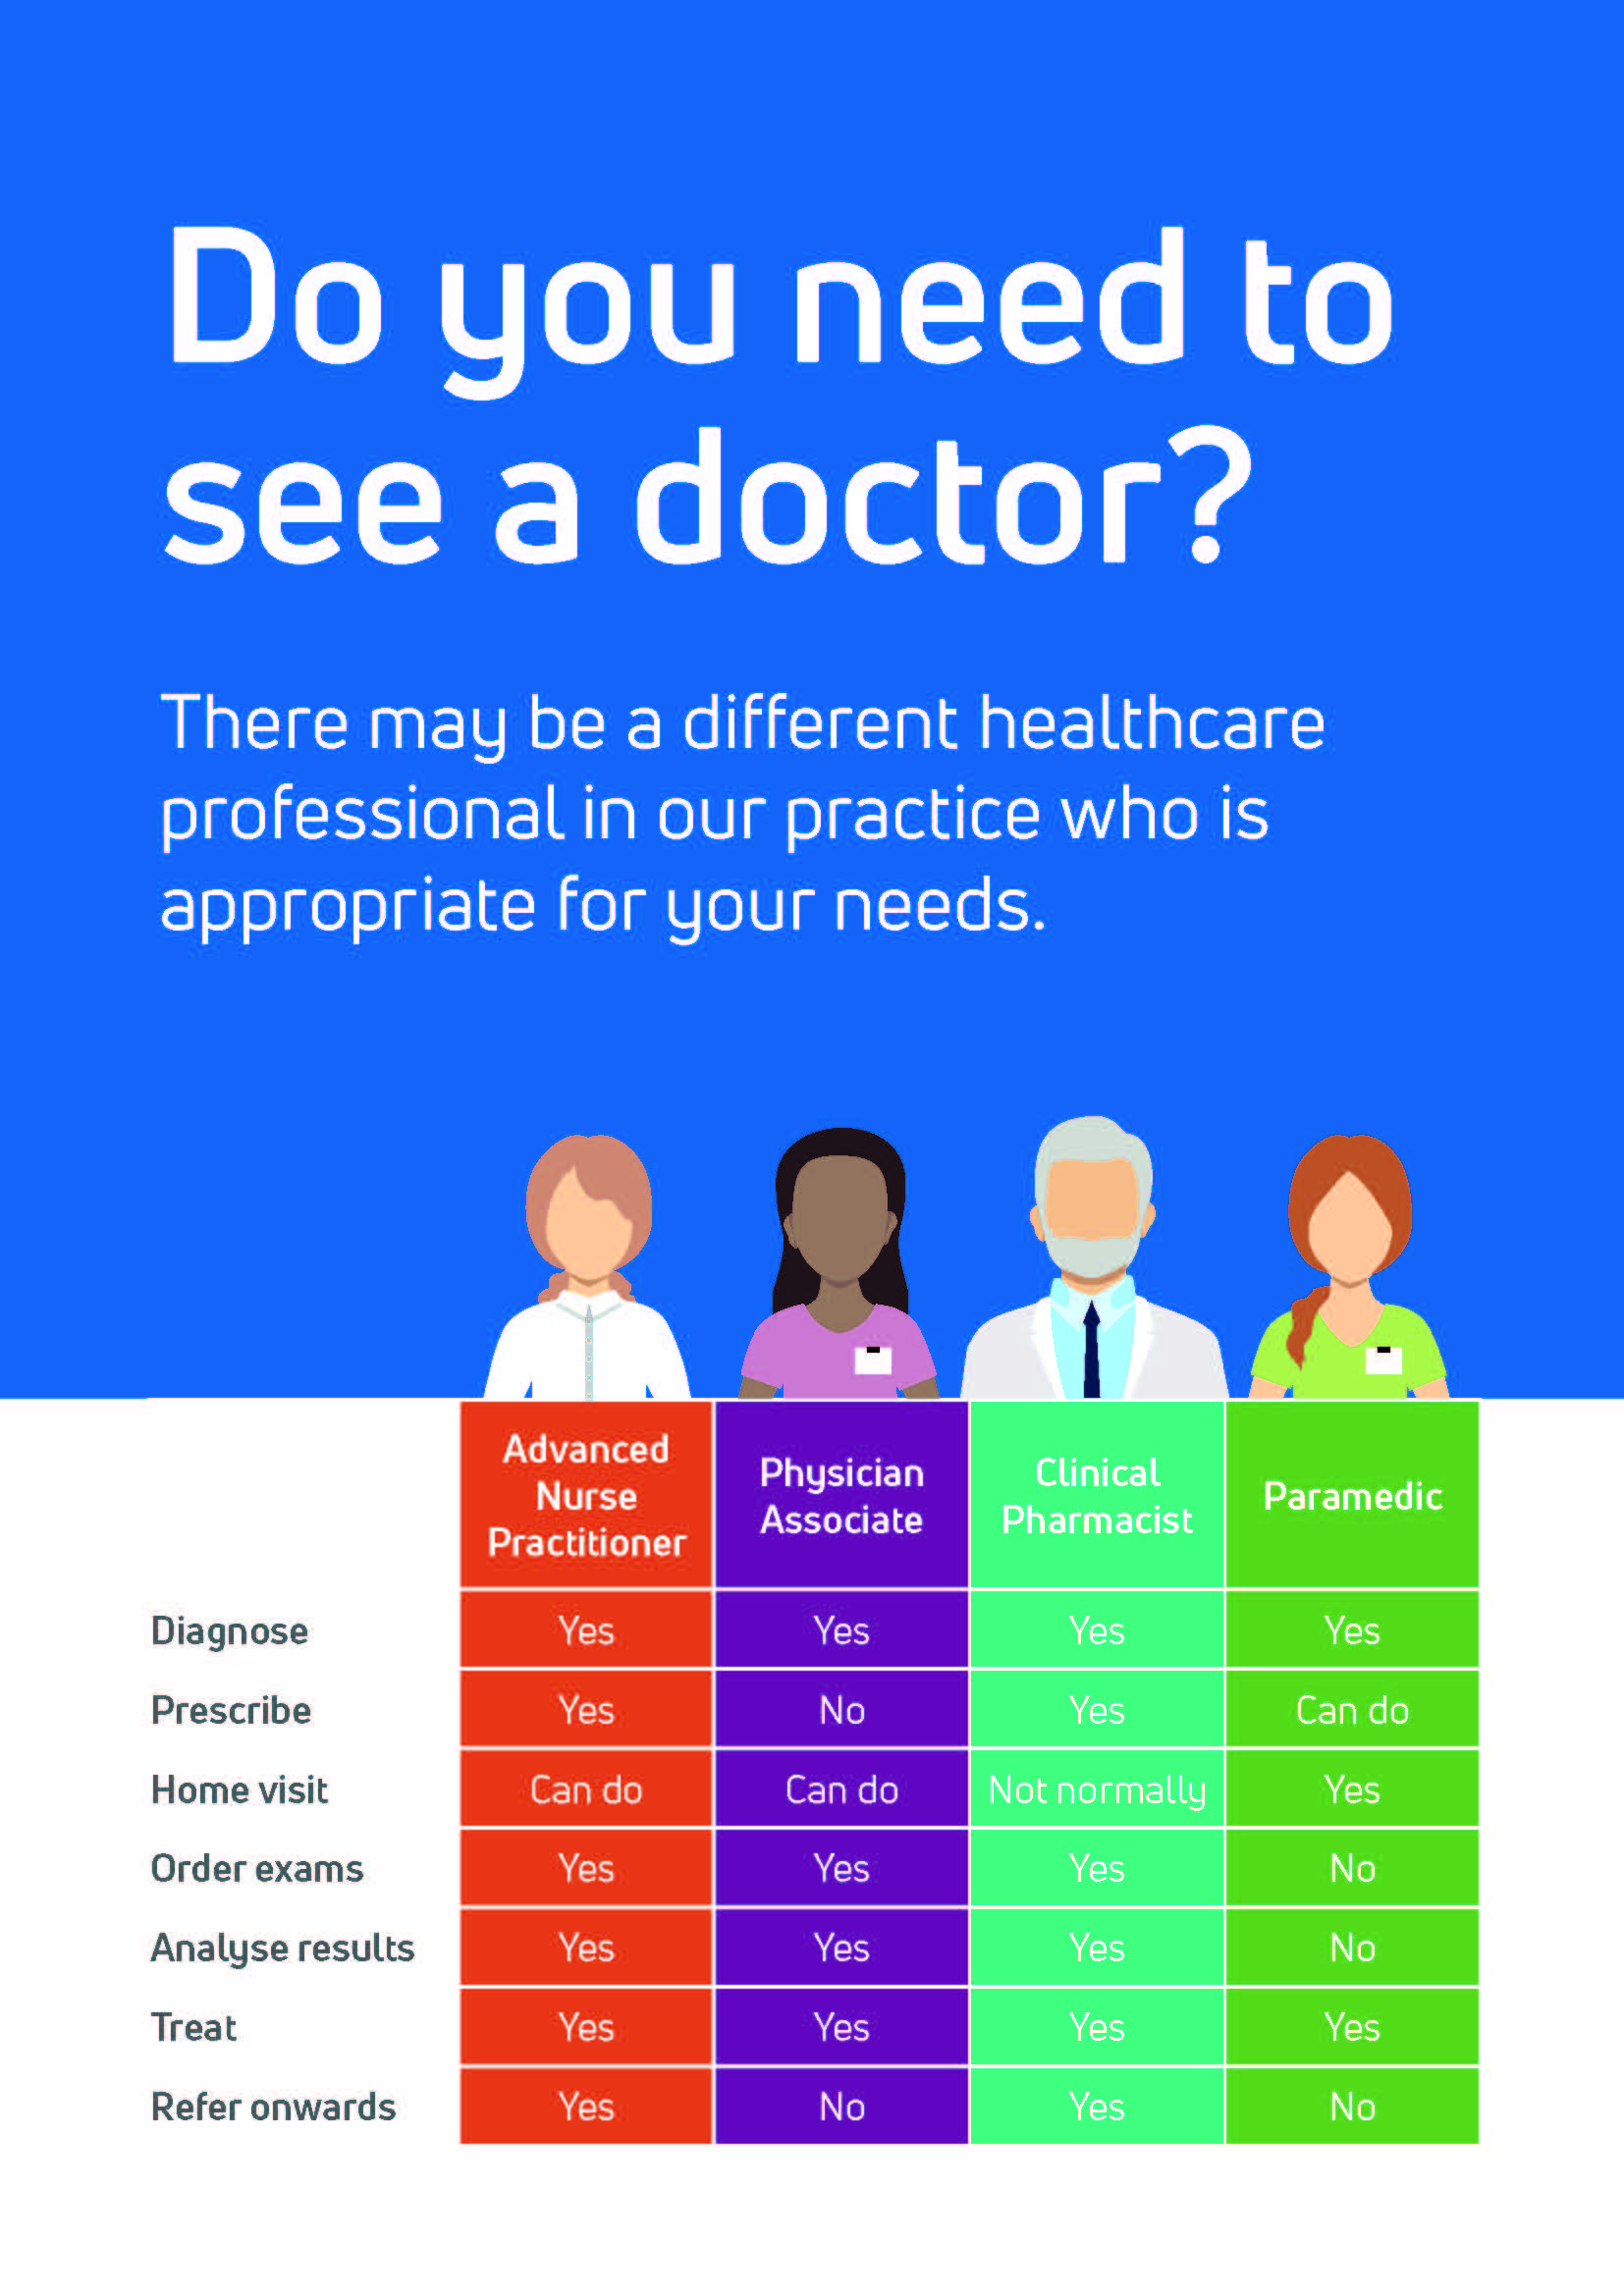 advice on whether you should see the doctor or not